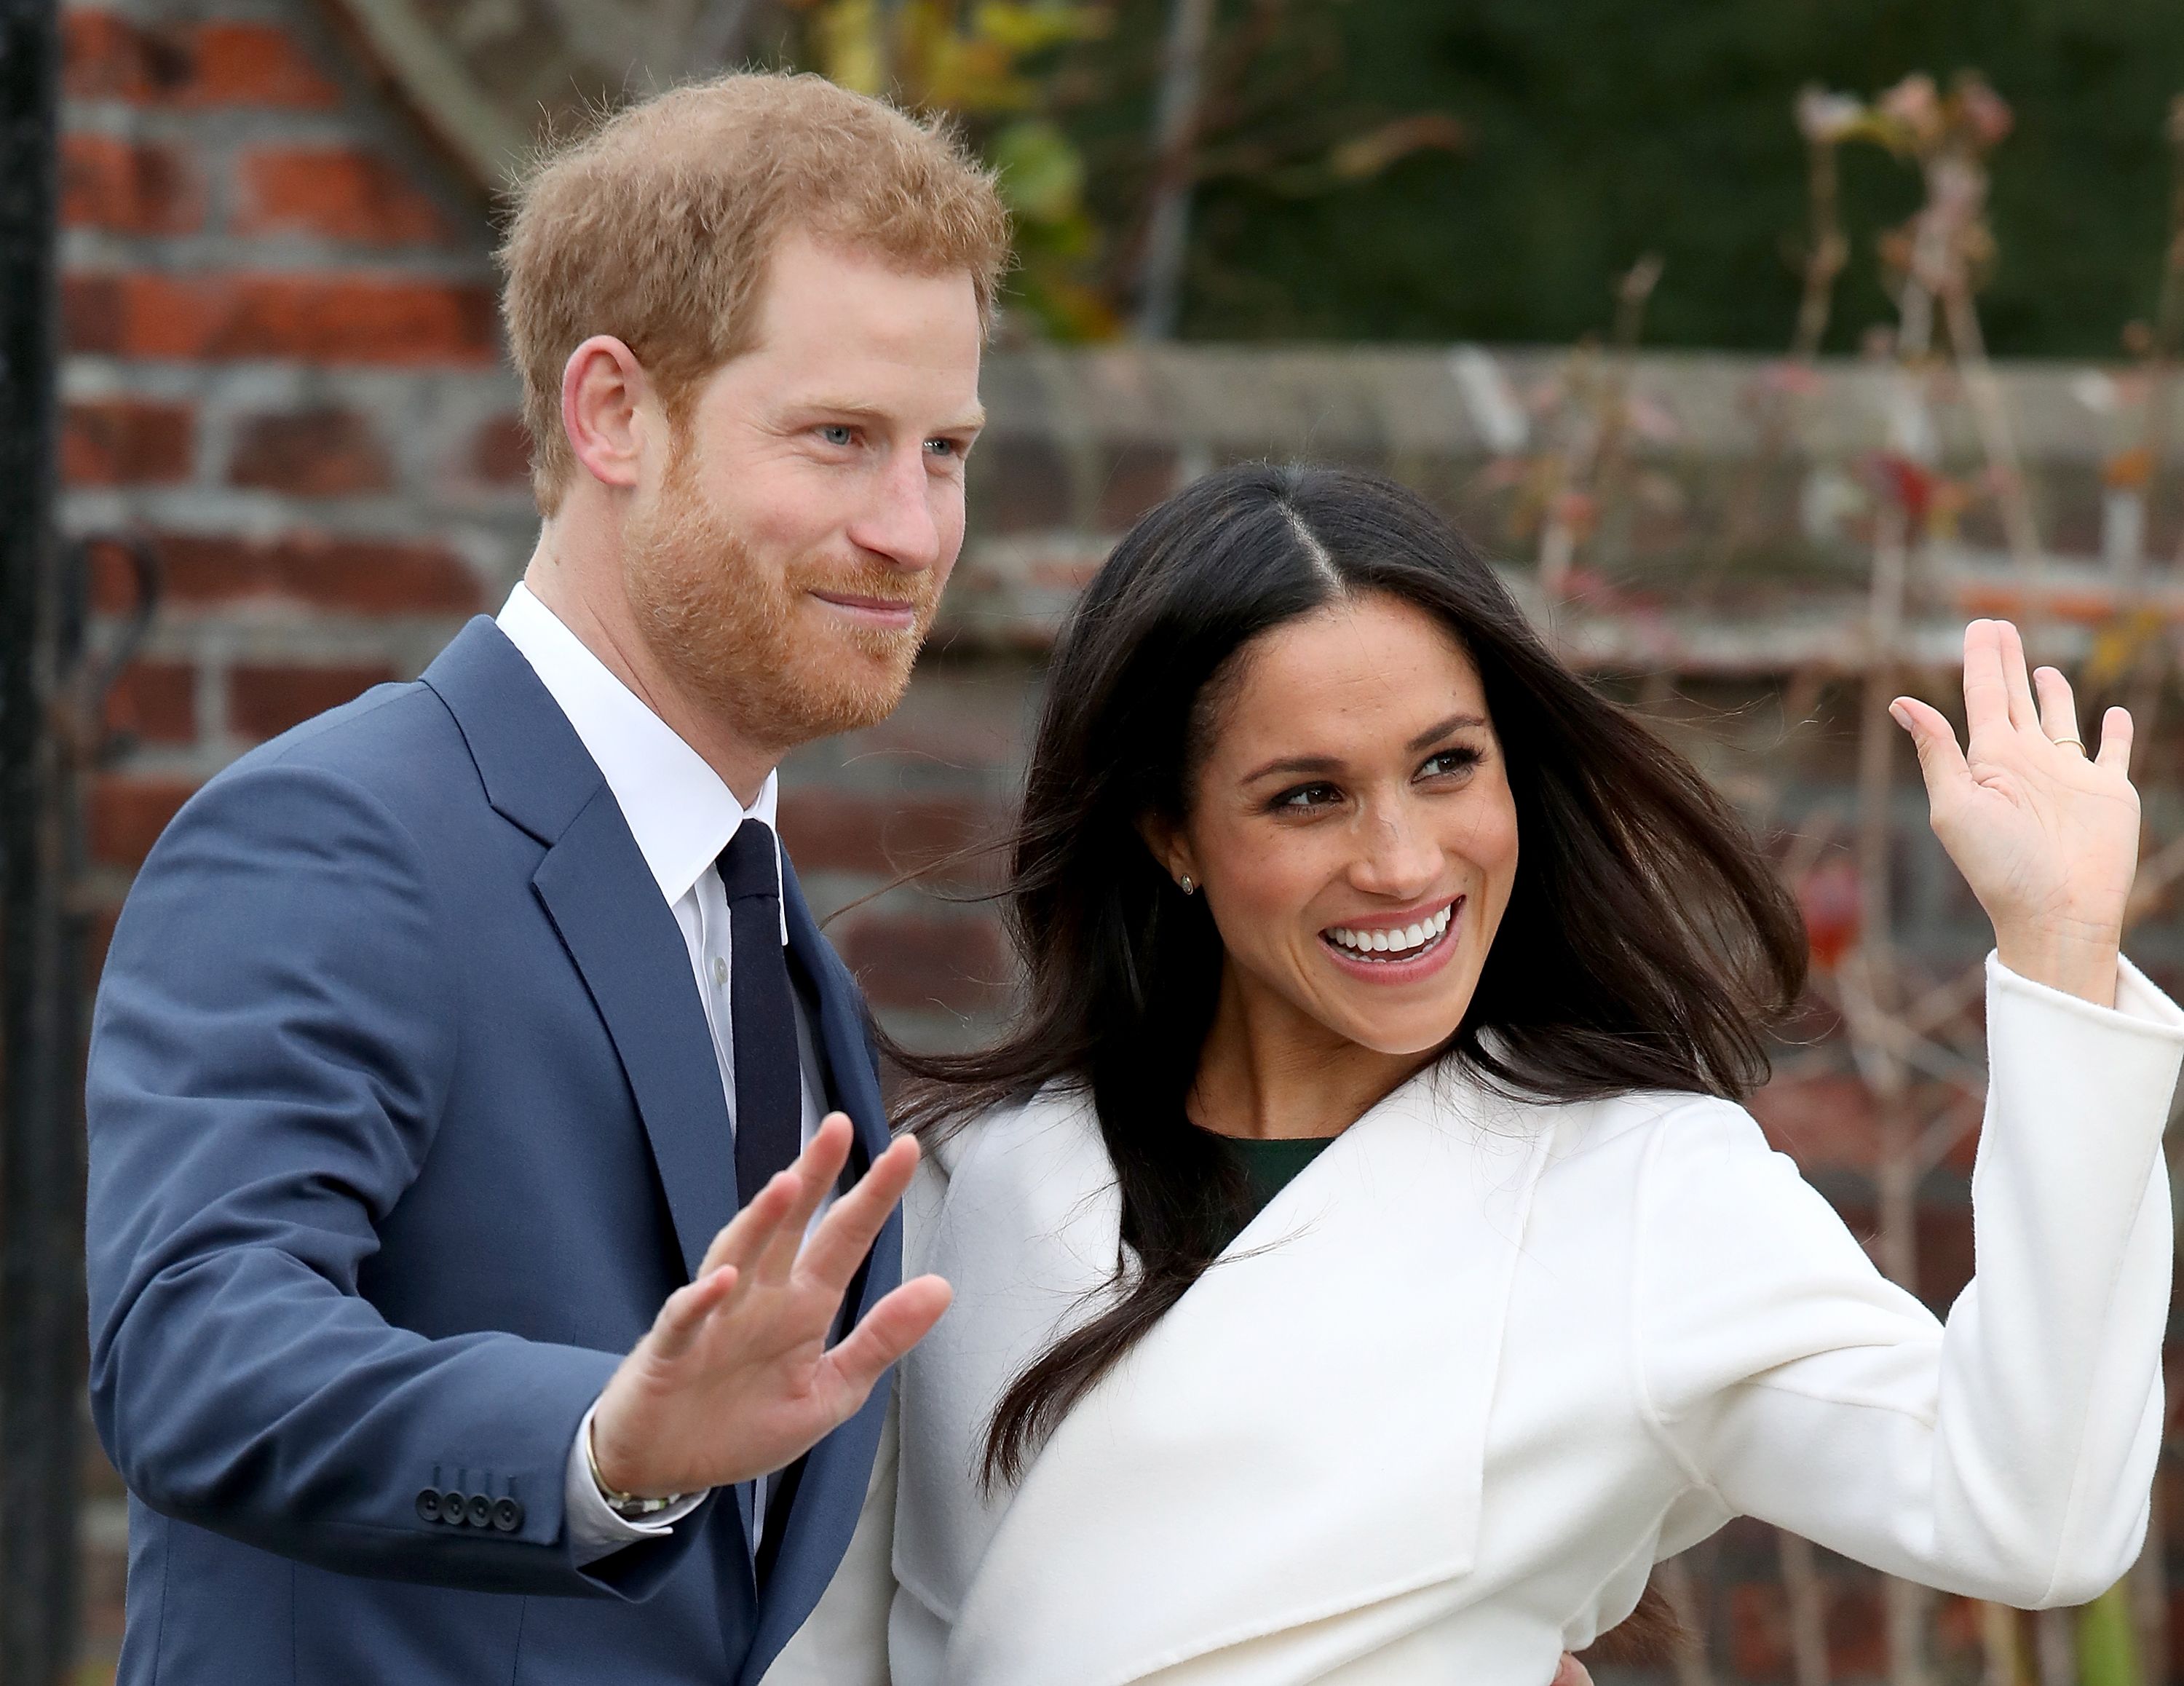 Prince Harry and Meghan Markle announce their engagement at Kensington Palace on November 27, 2017, in London, England | Photo: Getty Images